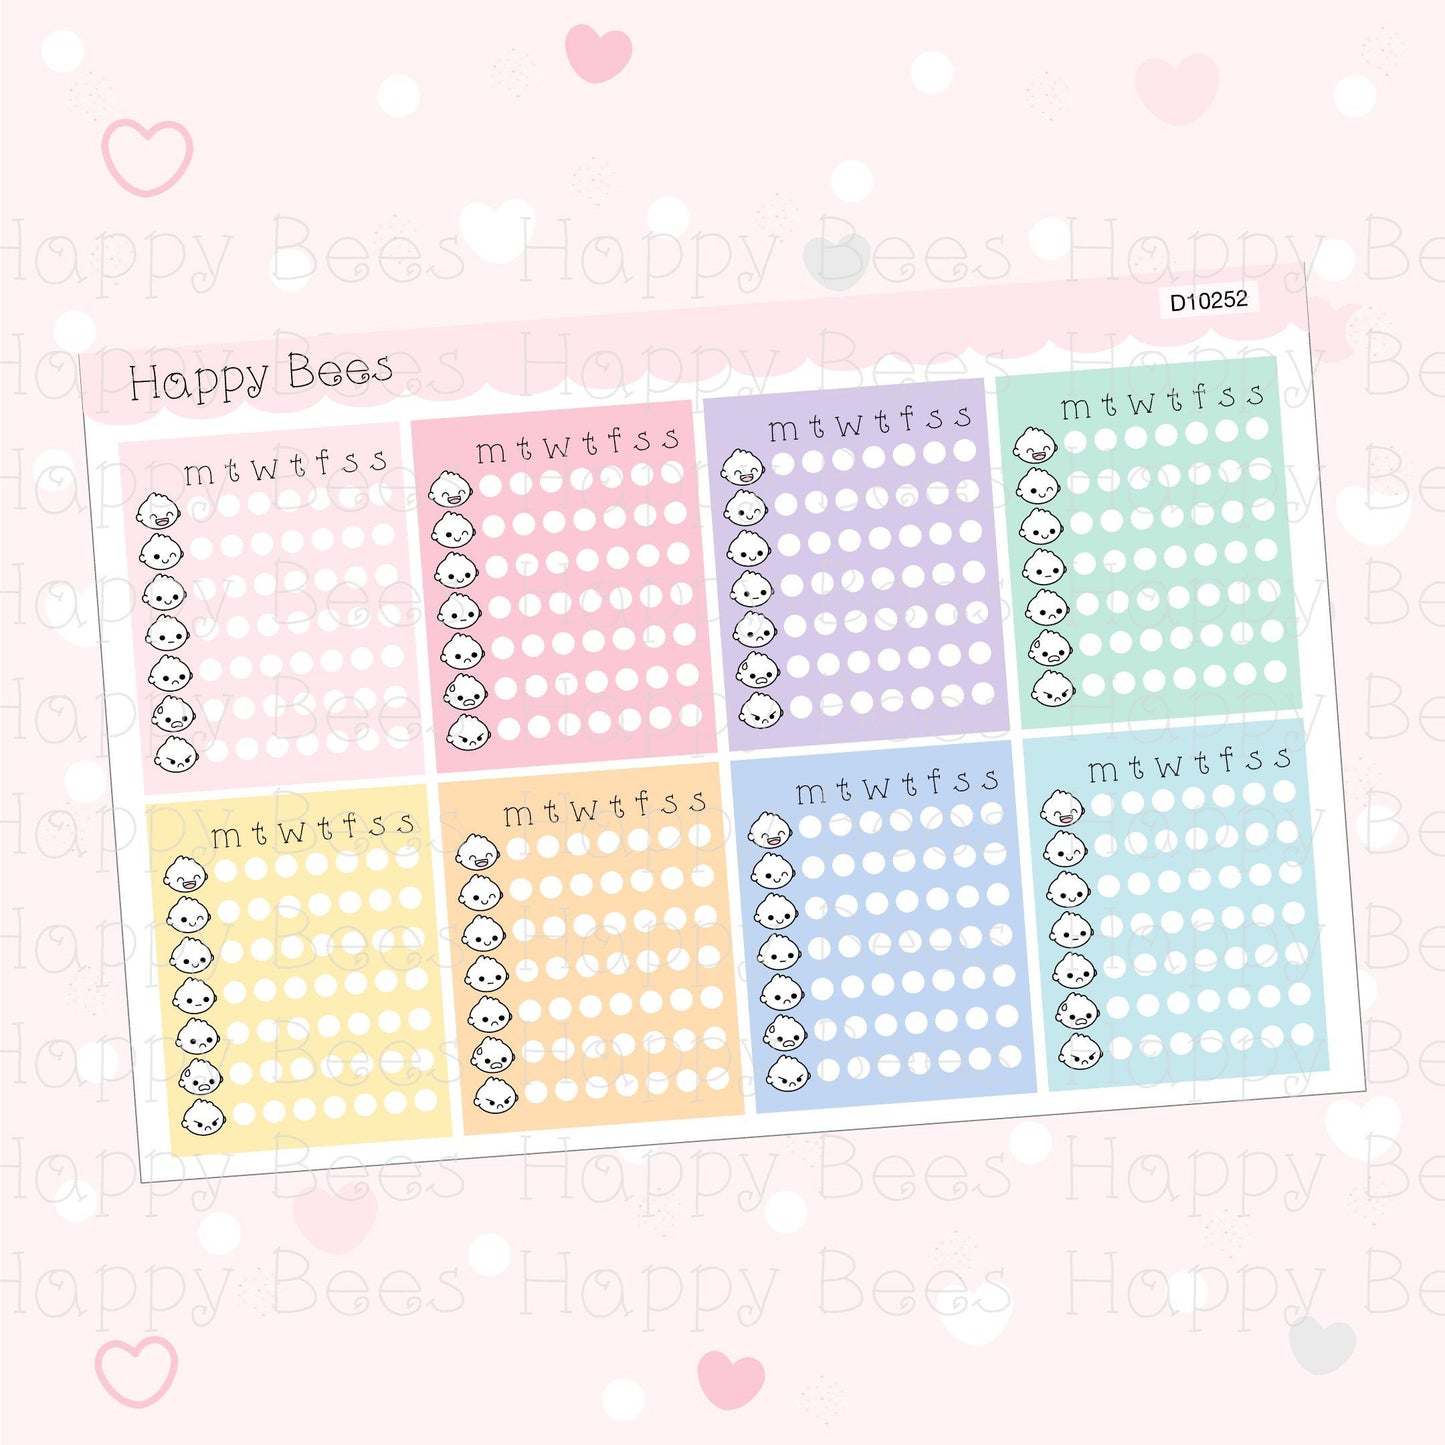 Weekly Mood Tracker Full Boxes - Cute Functional Planner Stickers D10252